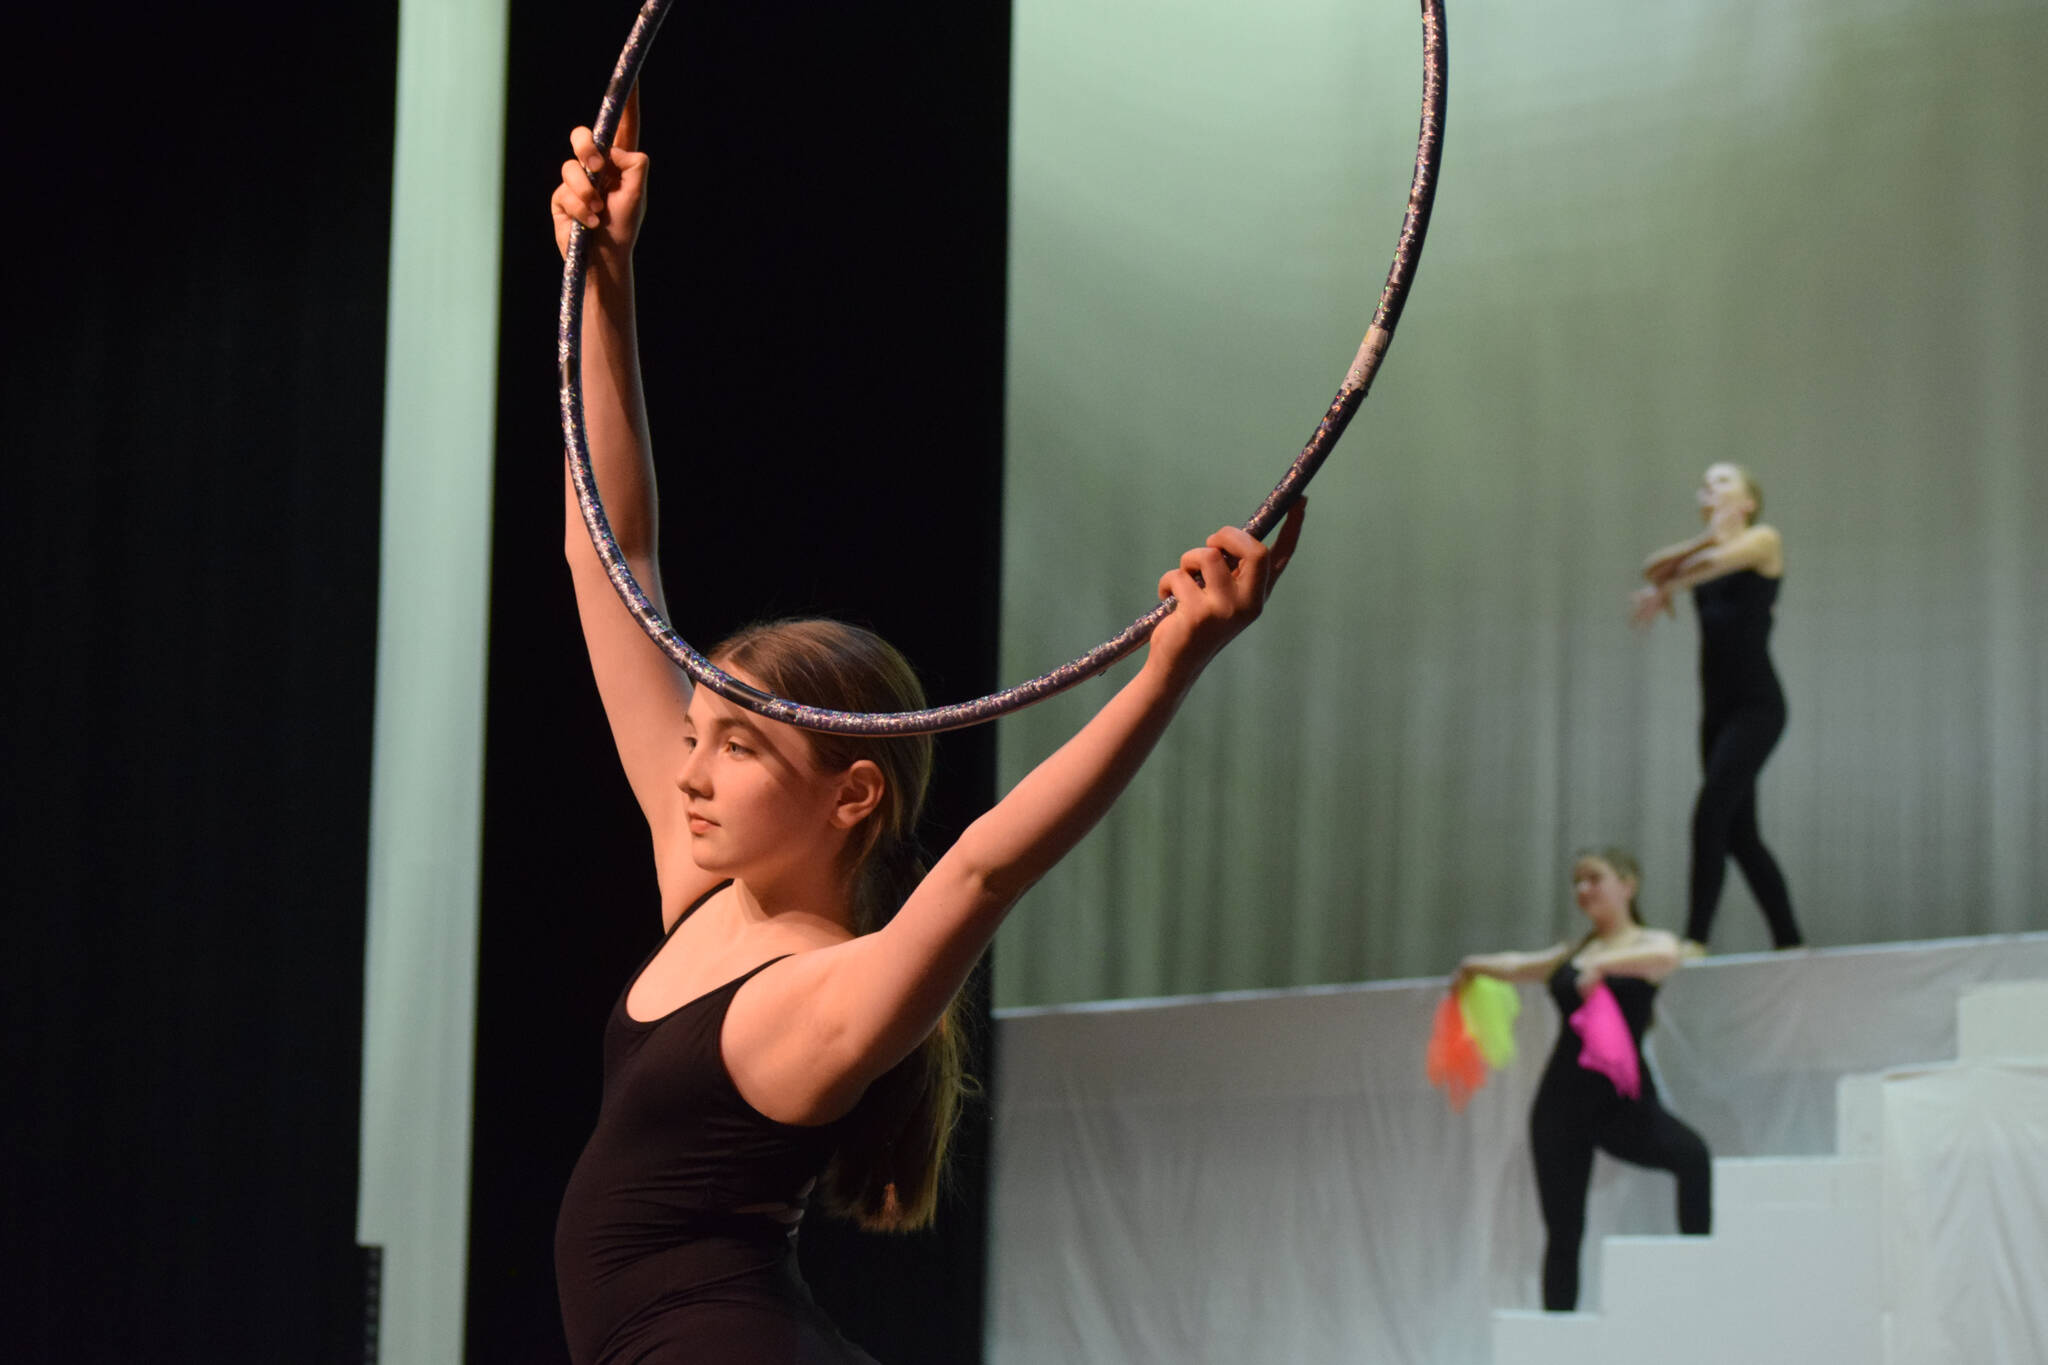 Performers prepare for the Forever Dance company showcase “Among Dreams” during a rehearsal on Tuesday, March 22, 2022, at the Renee C. Henderson Auditorium in Kenai, Alaska. (Camille Botello/Peninsula Clarion)